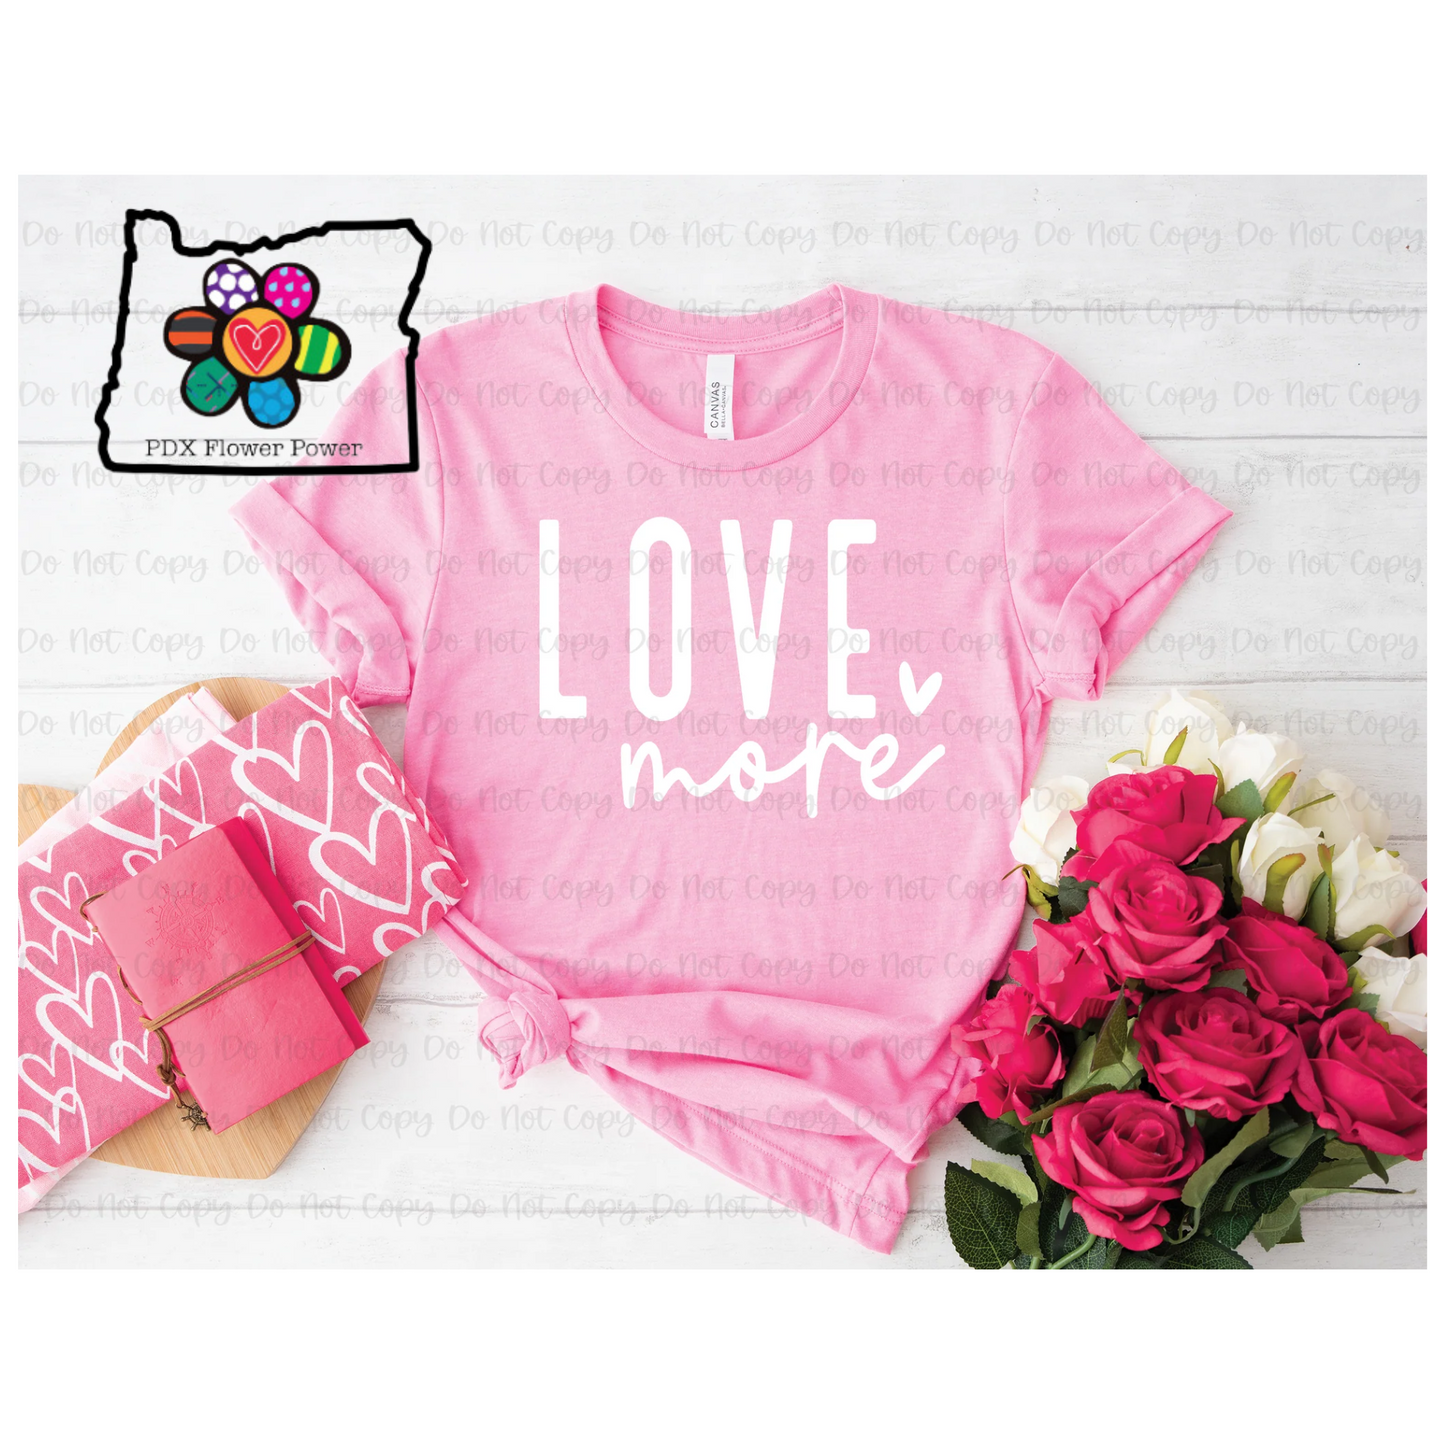 Love more pink  t-shirt, Valentine's t-shirt,  Funny t-shirt, gifts for her